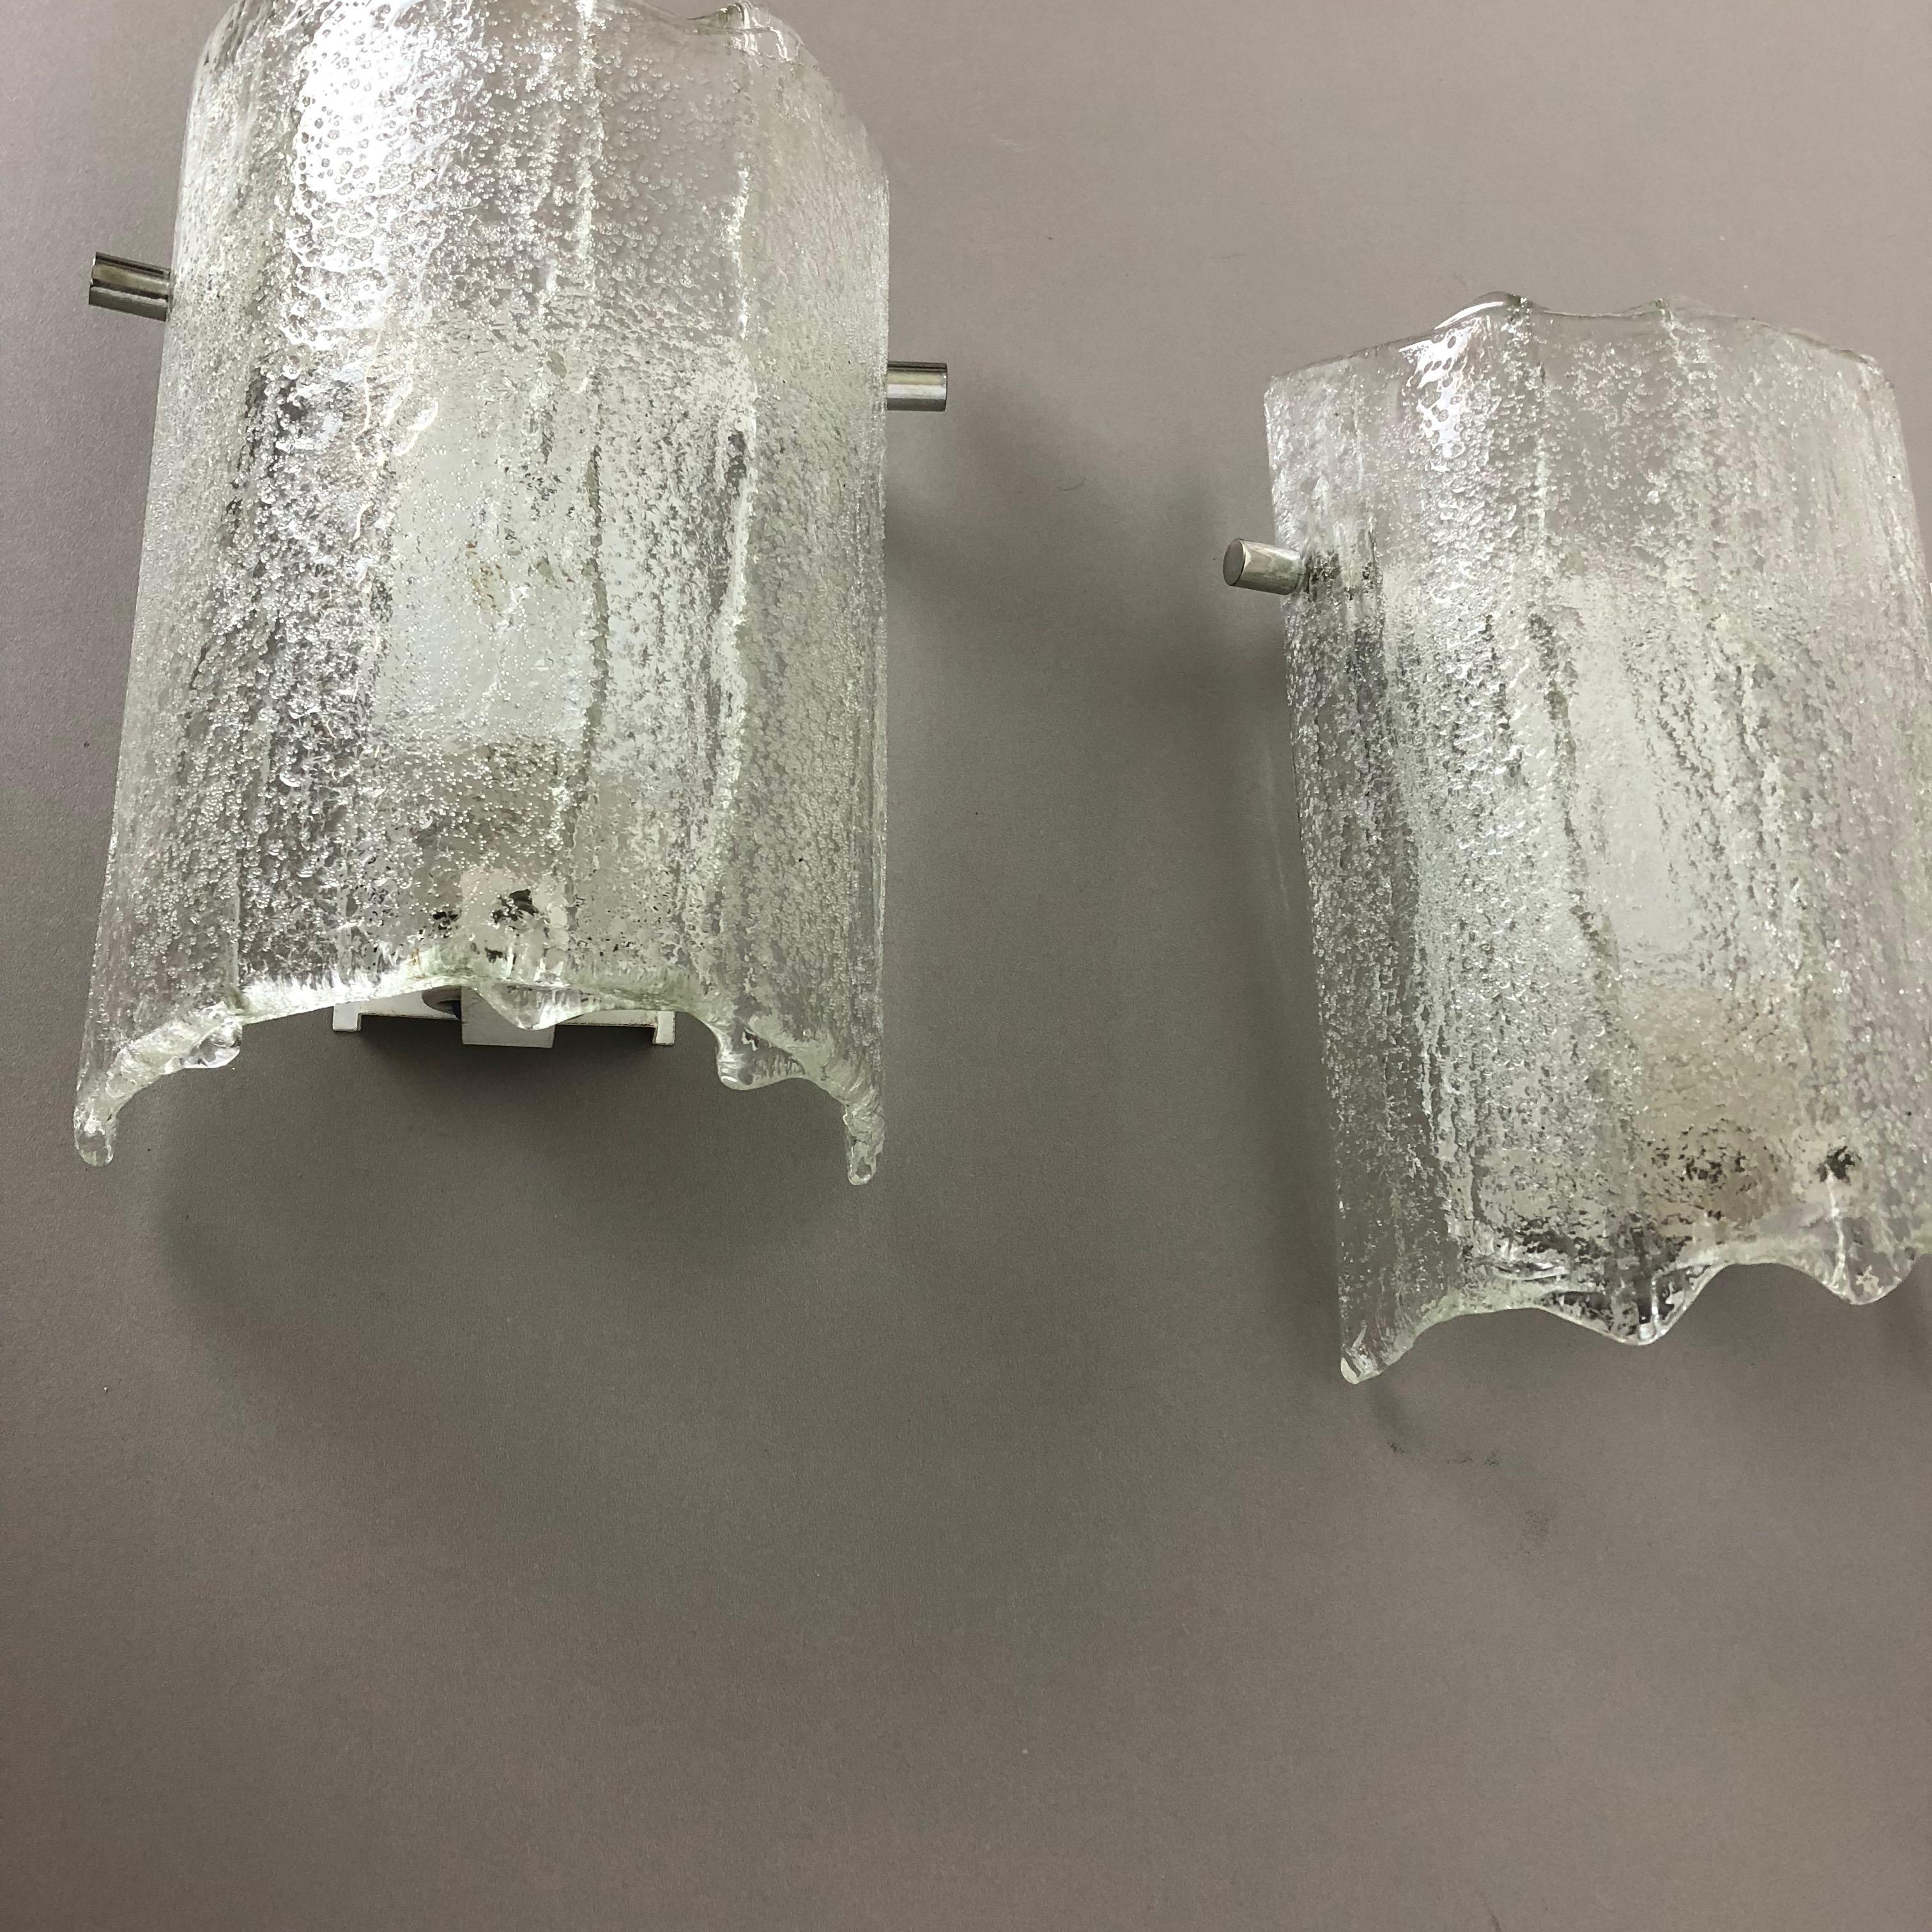 Set of 2 Vintage 1960s Ice Glass Metal Wall Light by Kaiser Leuchten, Germany For Sale 2